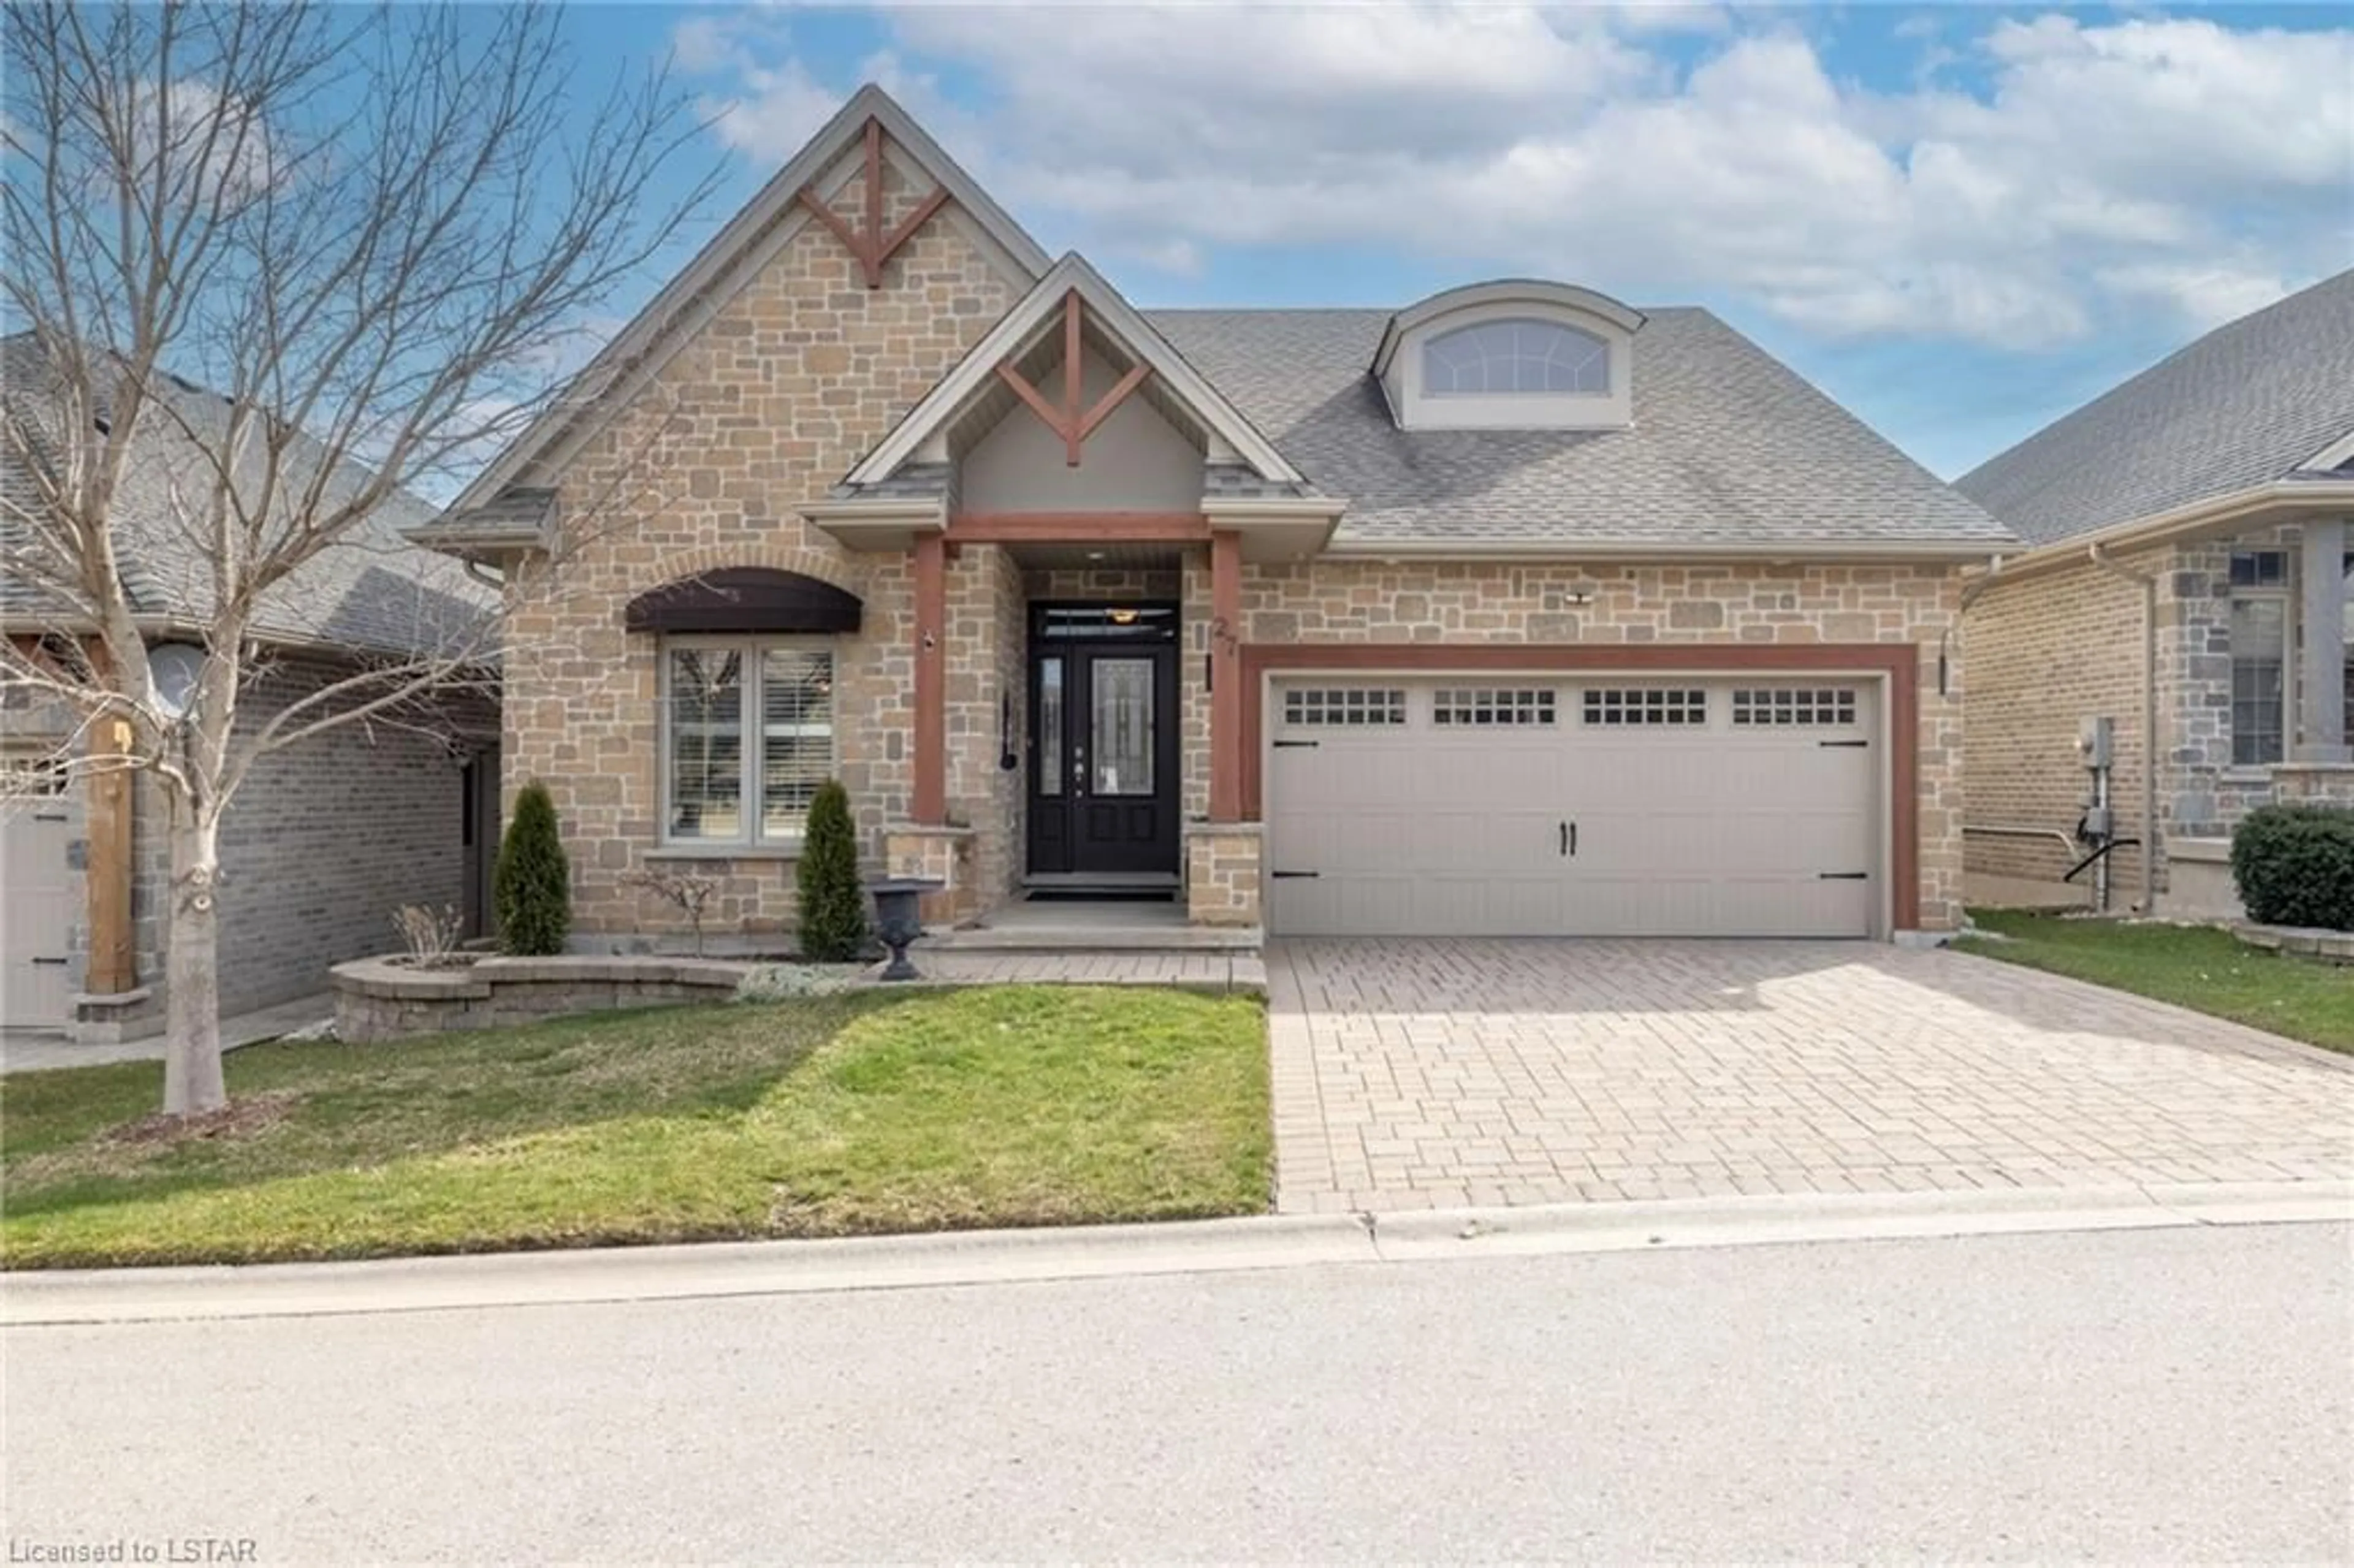 Home with brick exterior material for 1630 Shore Rd #27, London Ontario N6K 5B9